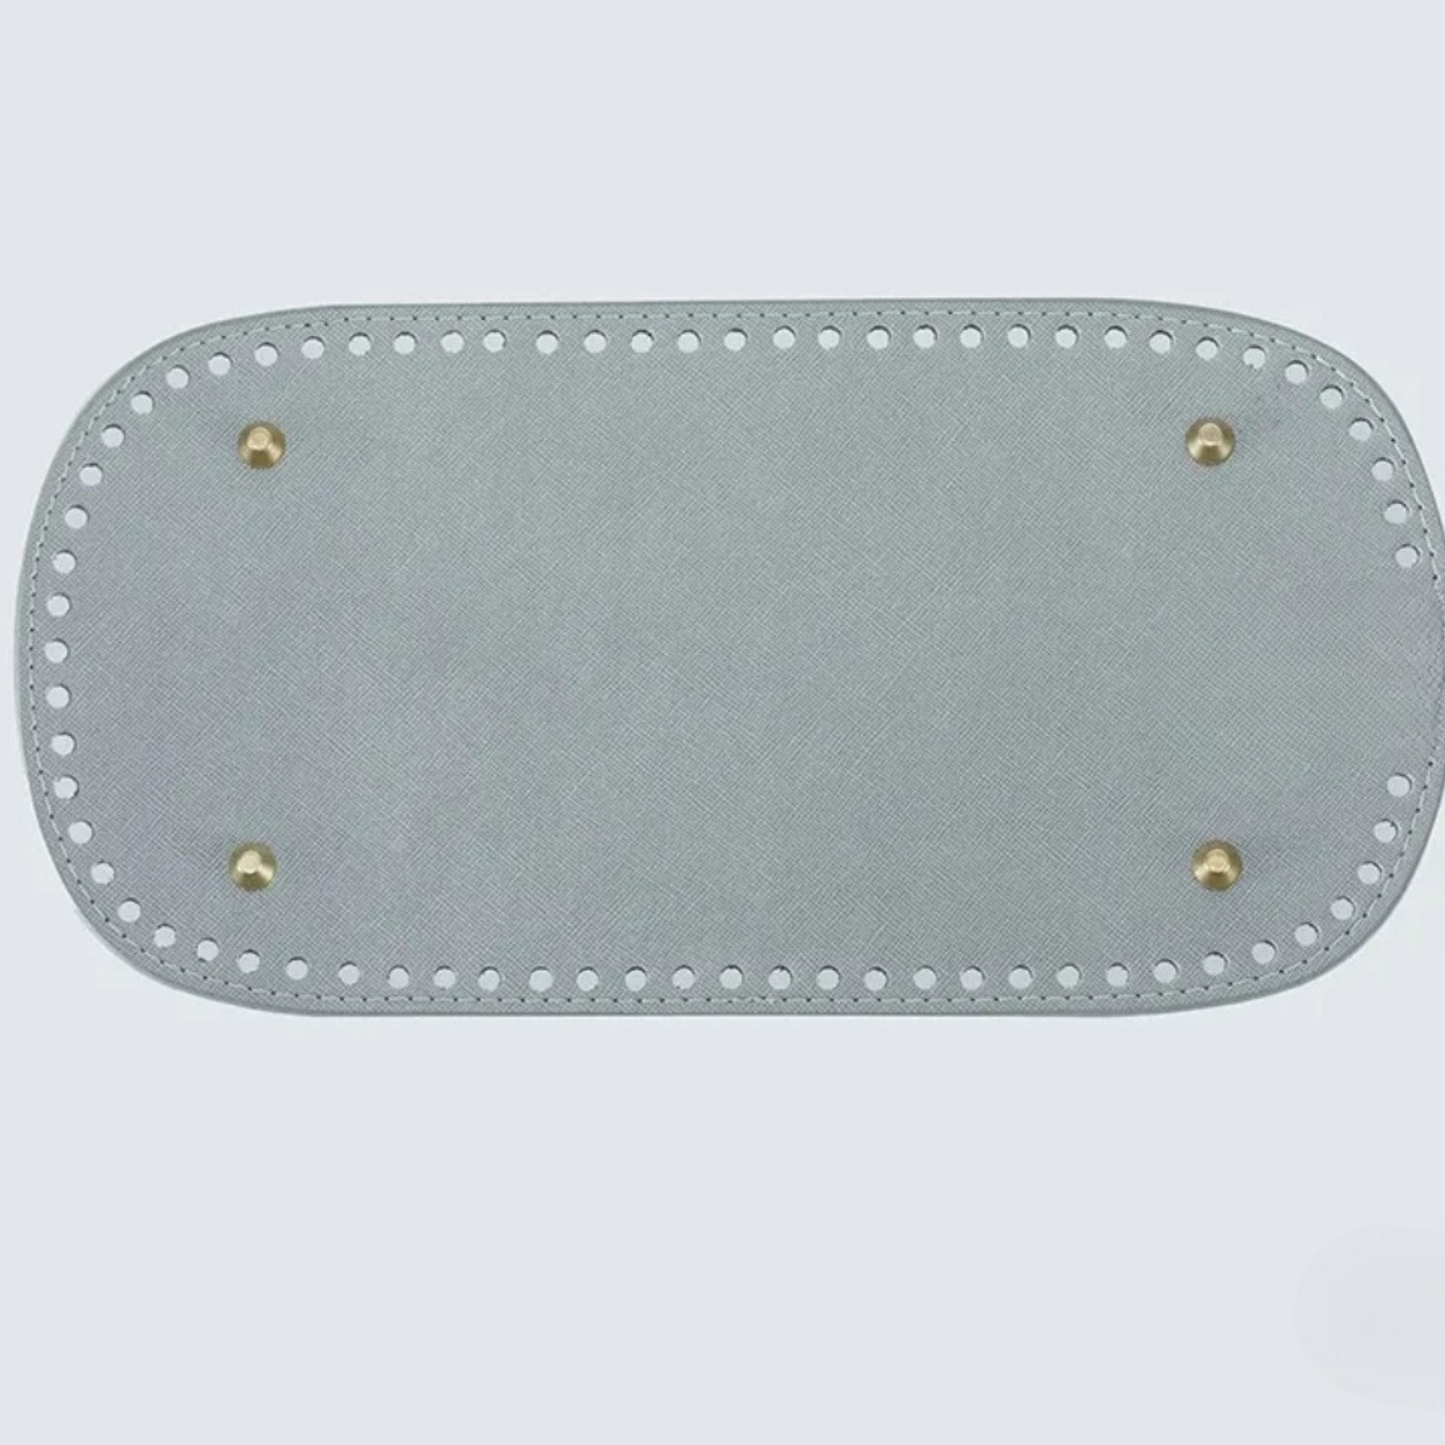 Leather Bottom with holes for Crochet Bag Making